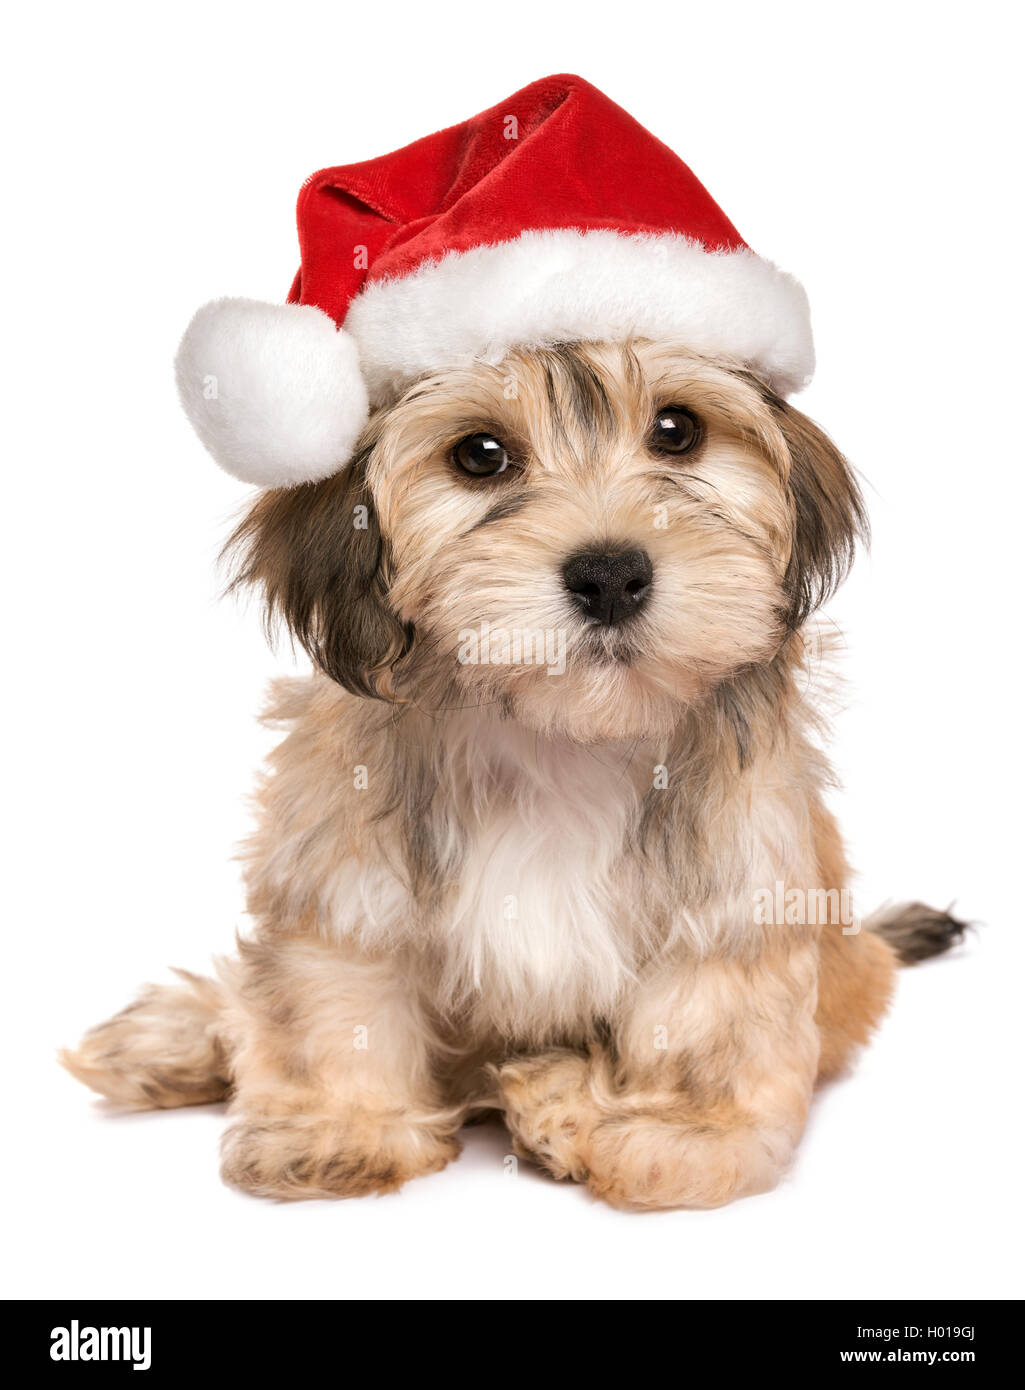 Funny sitting Bichon Havanese puppy dog in a Christmas hat Stock Photo